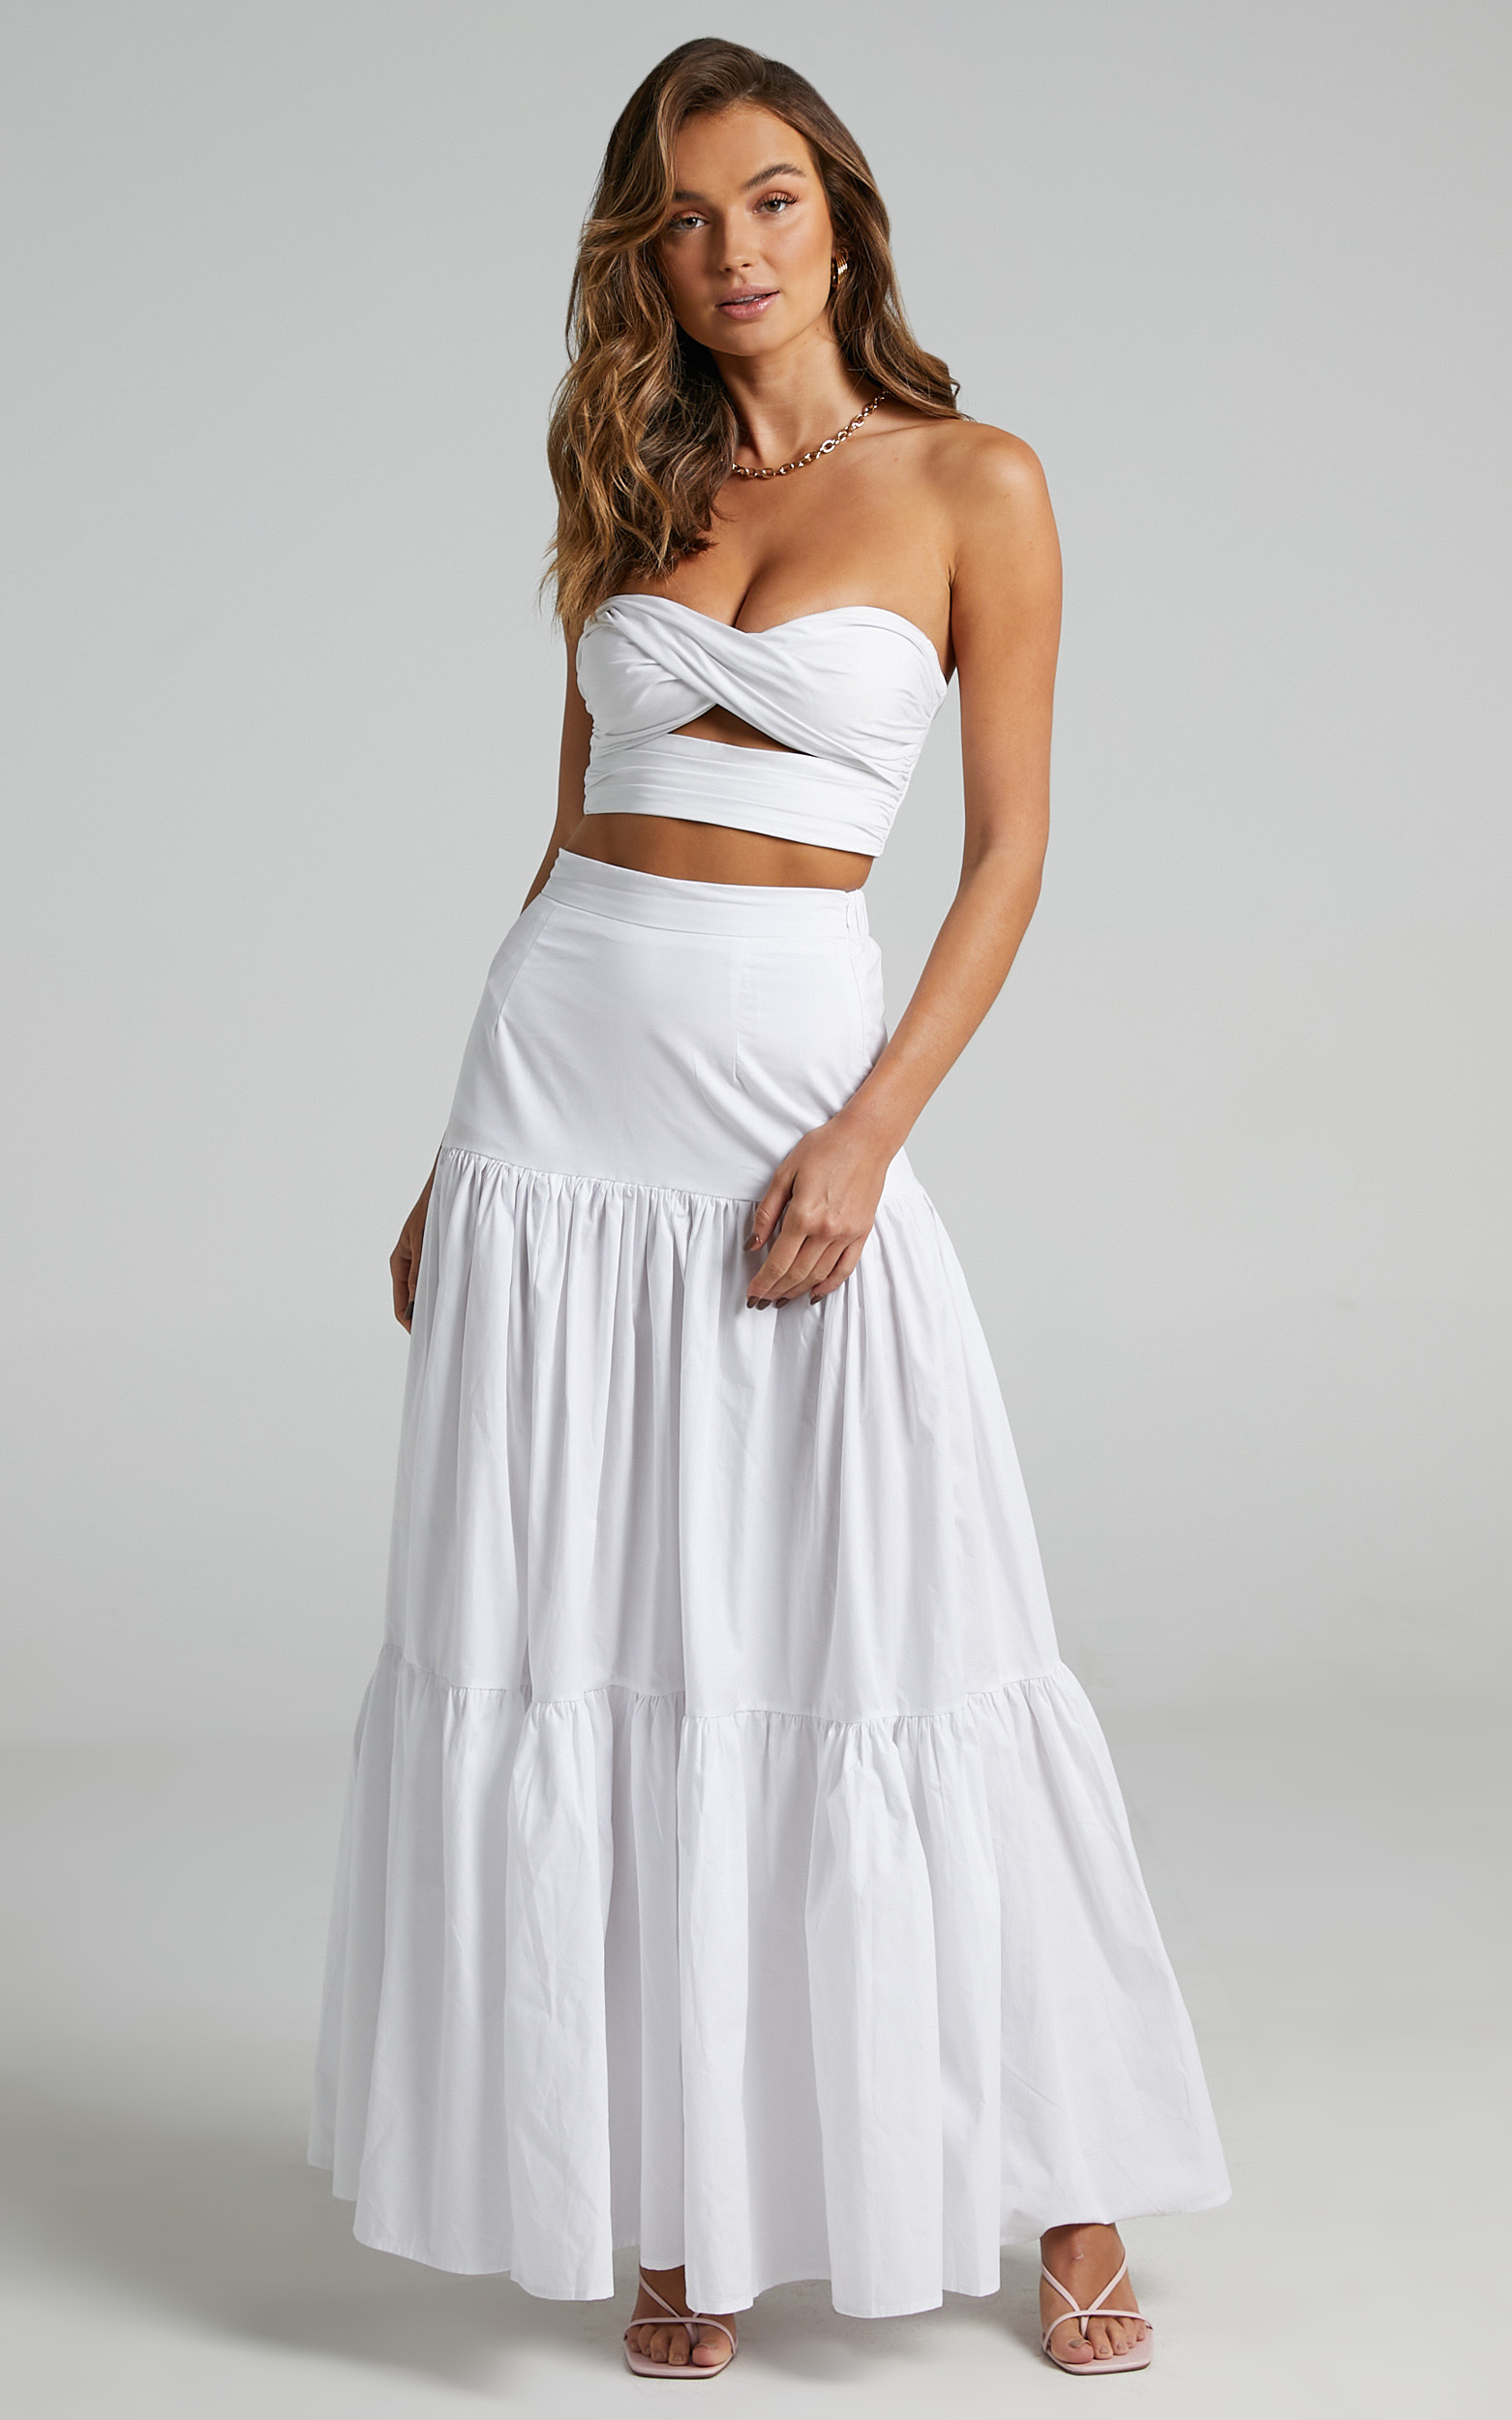 Runaway The Label - Ayla Maxi Skirt in White - L, WHT5, hi-res image number null